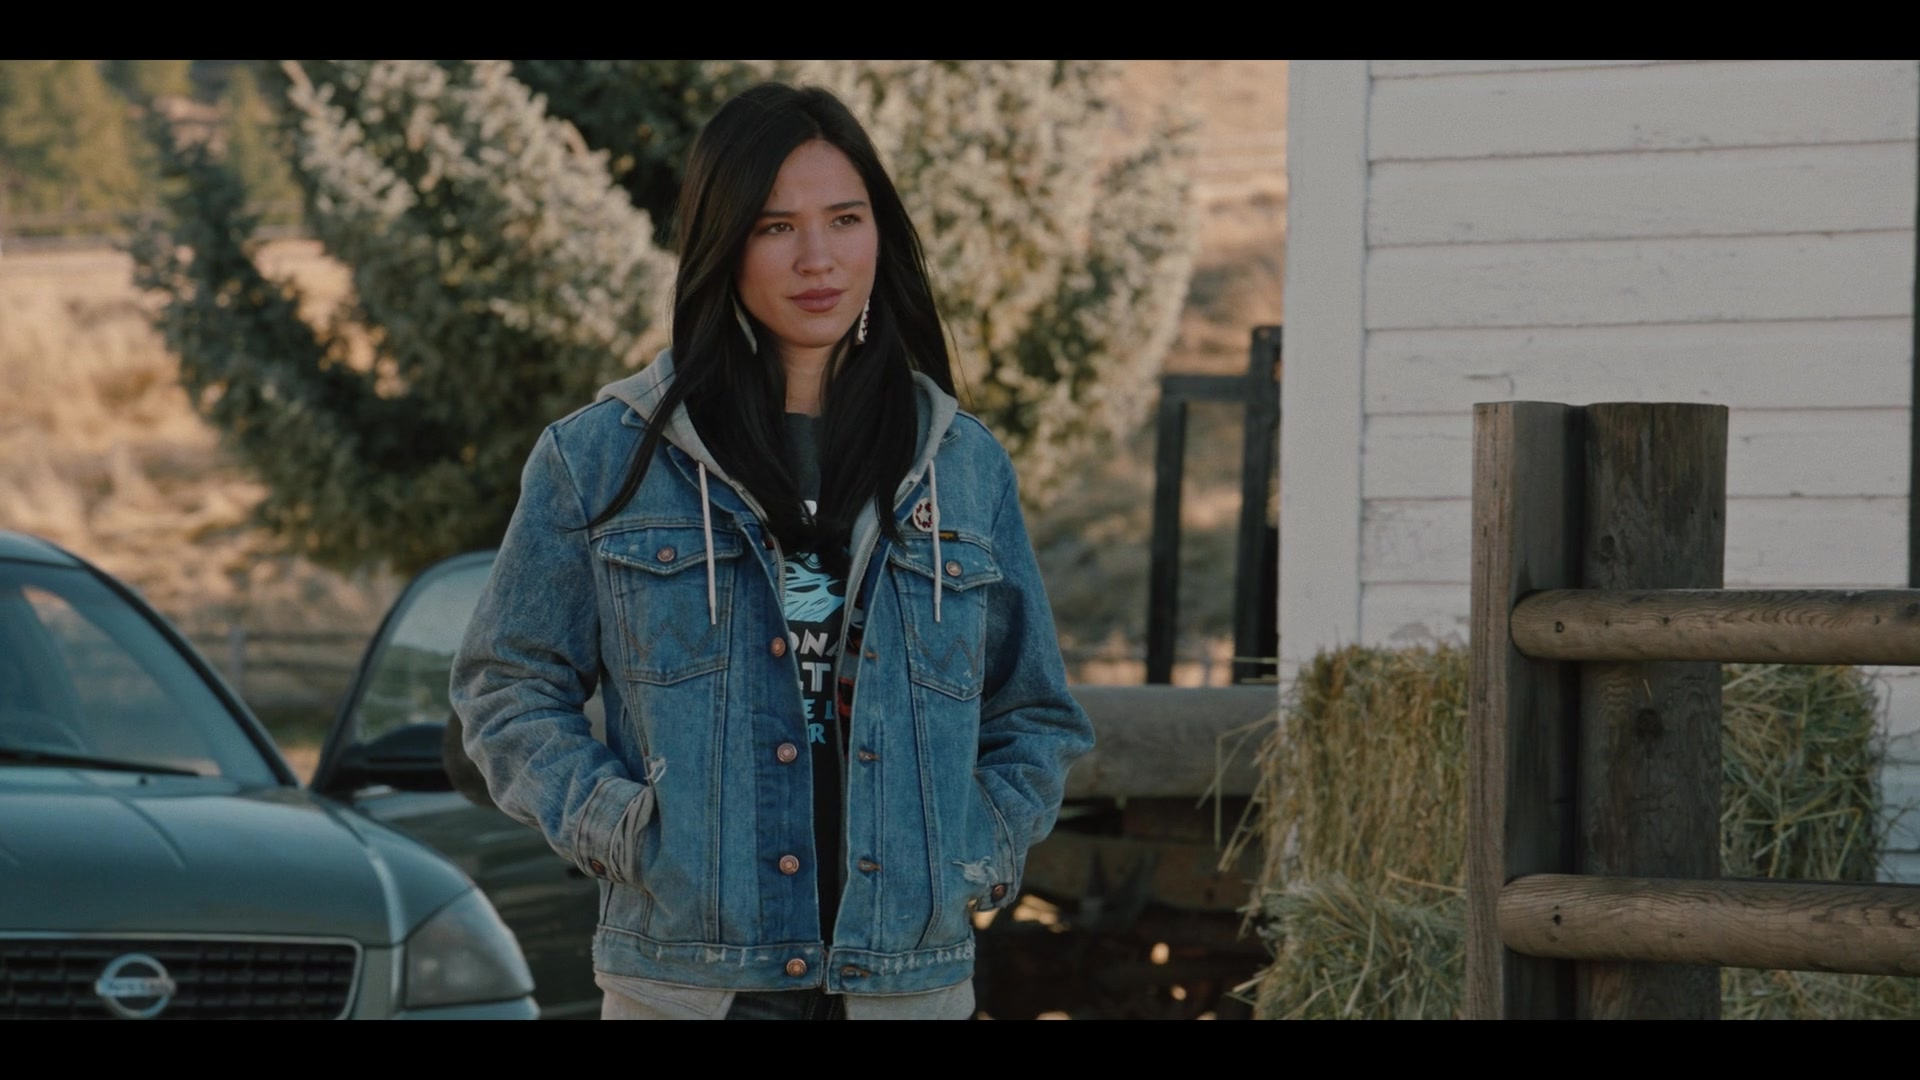 2019, I analyzed a TV Show and spotted product placement: Wrangler Denim Ja...